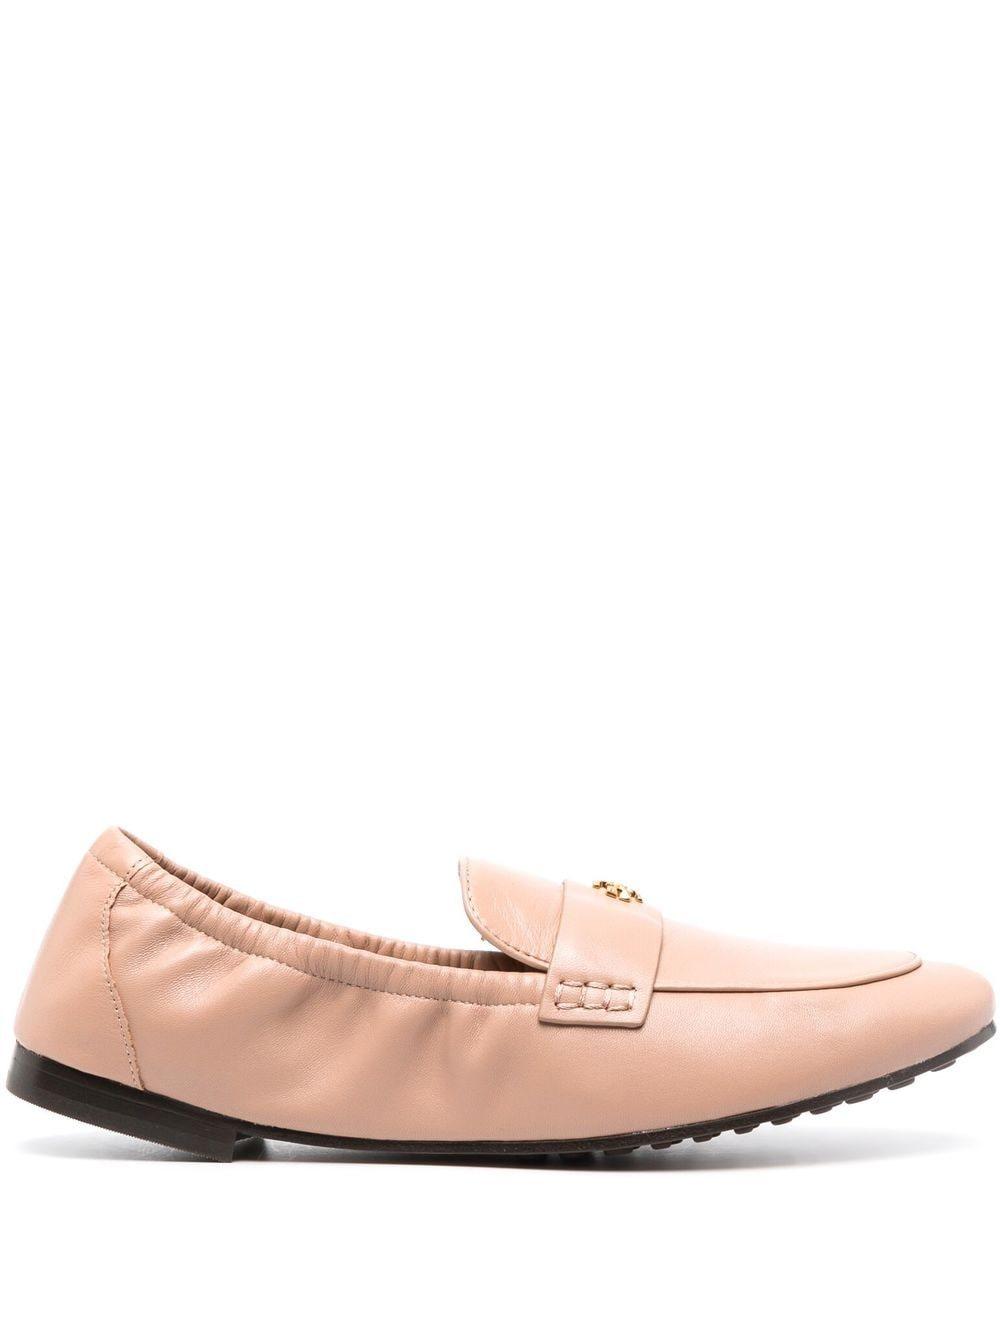 Tory Burch Ballet Leather Loafer - Women's - Rubber/calf Leather in ...